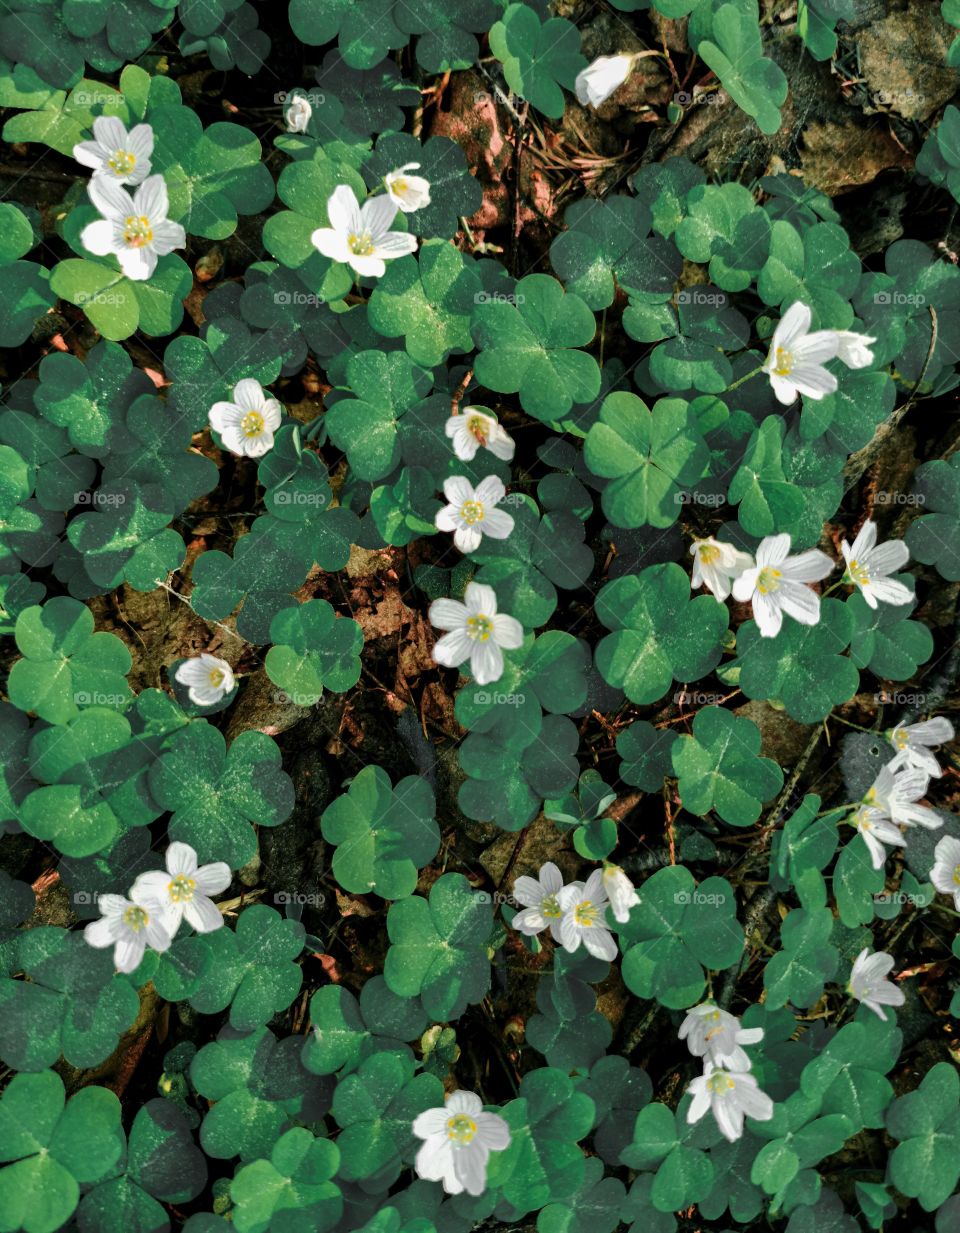 Oxalis flowers and leaves from above